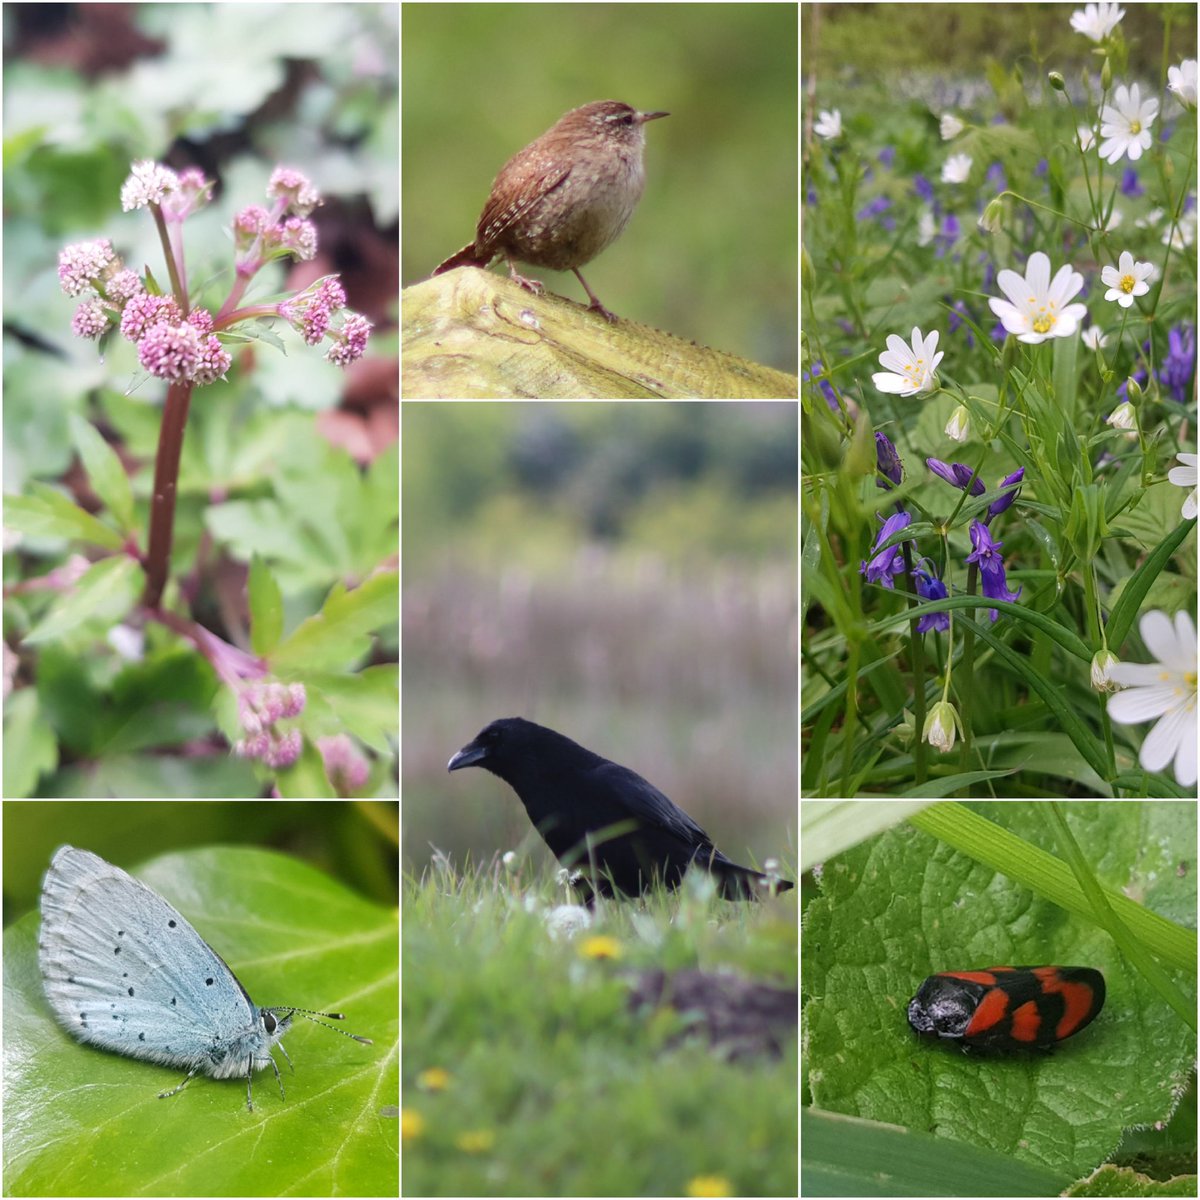 A snapshot of Day 1 from the City nature challenge 2024. Had a fantastic 4 days adventuring and discovering lots of wildlife! 
Images from - Doxey marshes & Loynton moss

@citnatchallenge @StaffsWildlife #citizenscience #ukwildlife #citynaturechallenge2024